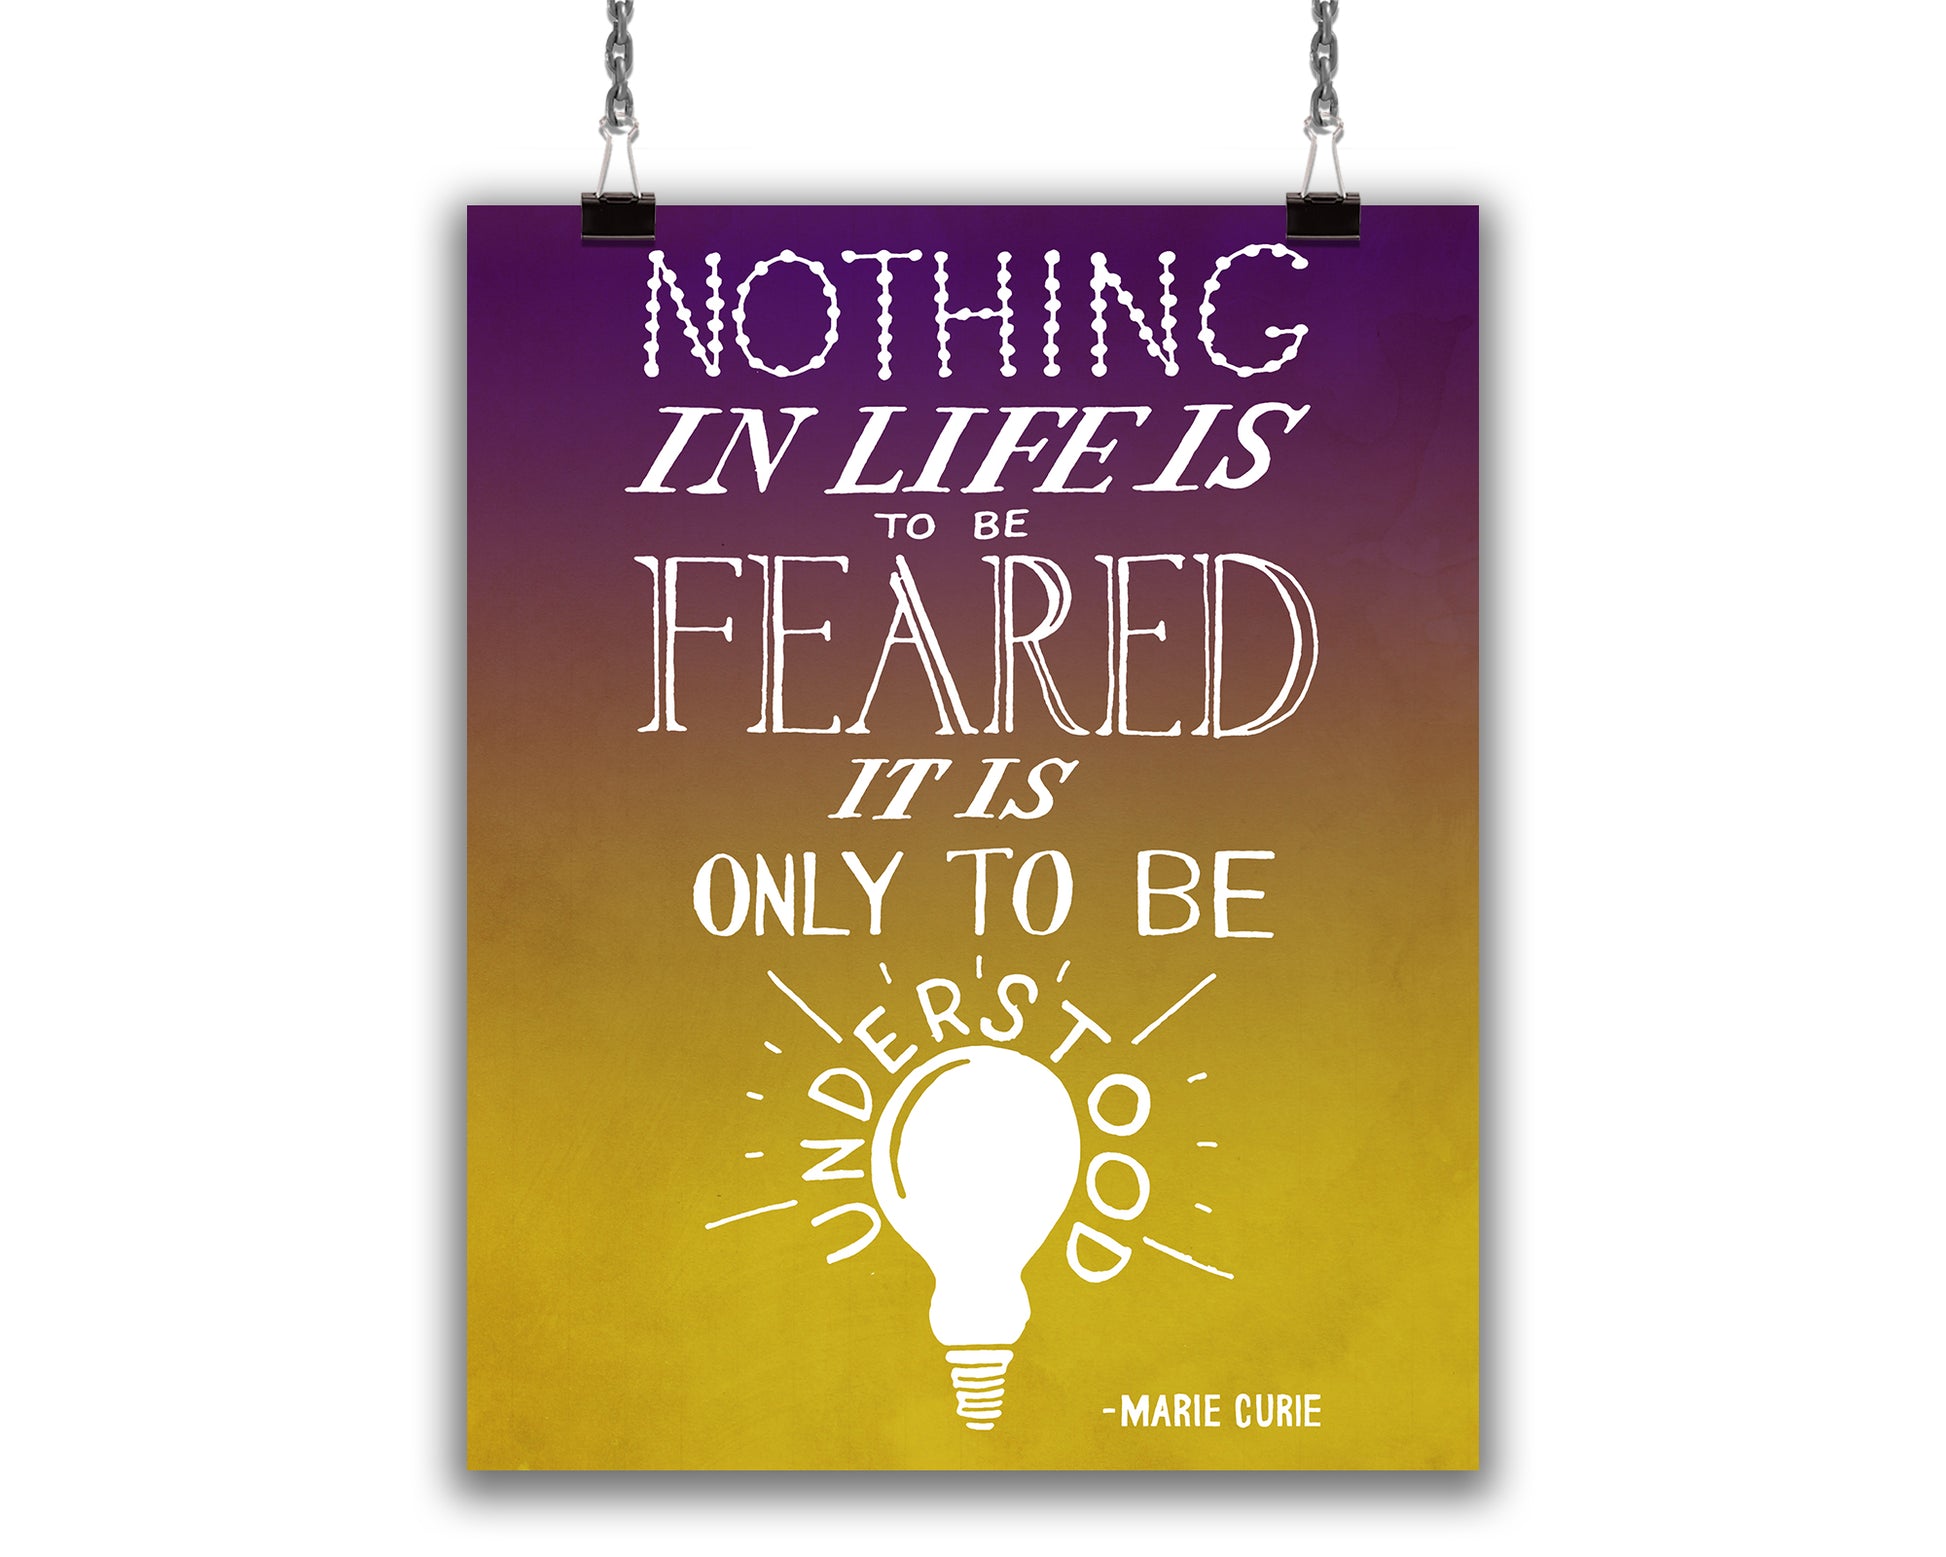 Art Print with hand lettered motivational quote from Marie Curie that reads in white text: Nothing in life is to be feared, it is only to be understood." on a gradient purple and yellow background and illustration of a shining lightbulb